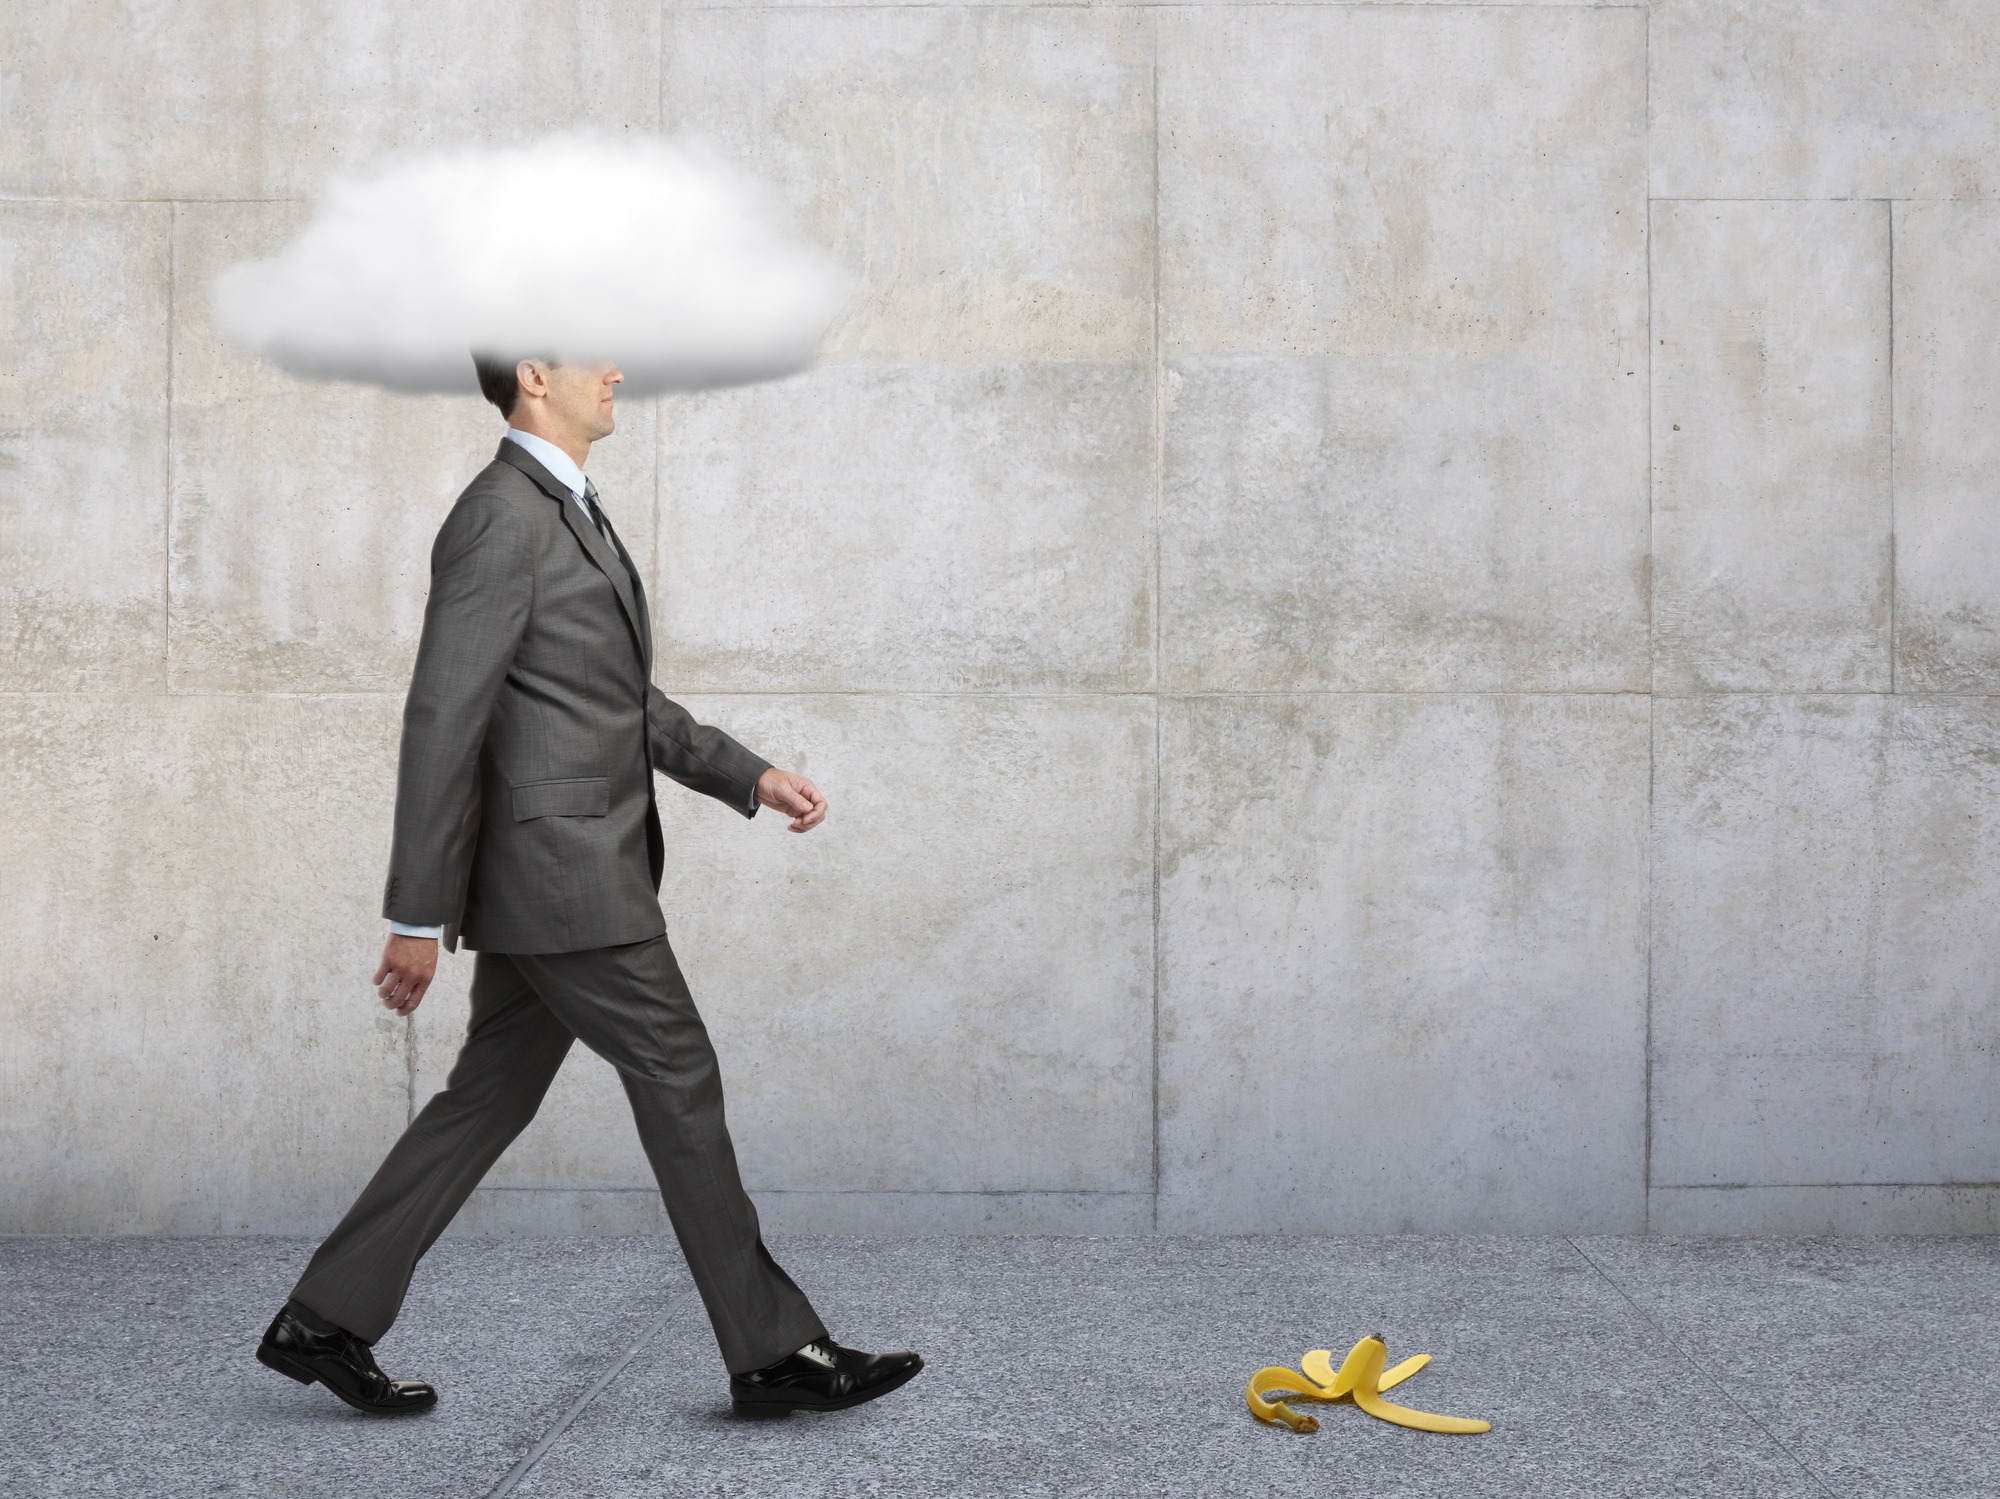 businessman with heads in clouds walking toward banana peel on ground